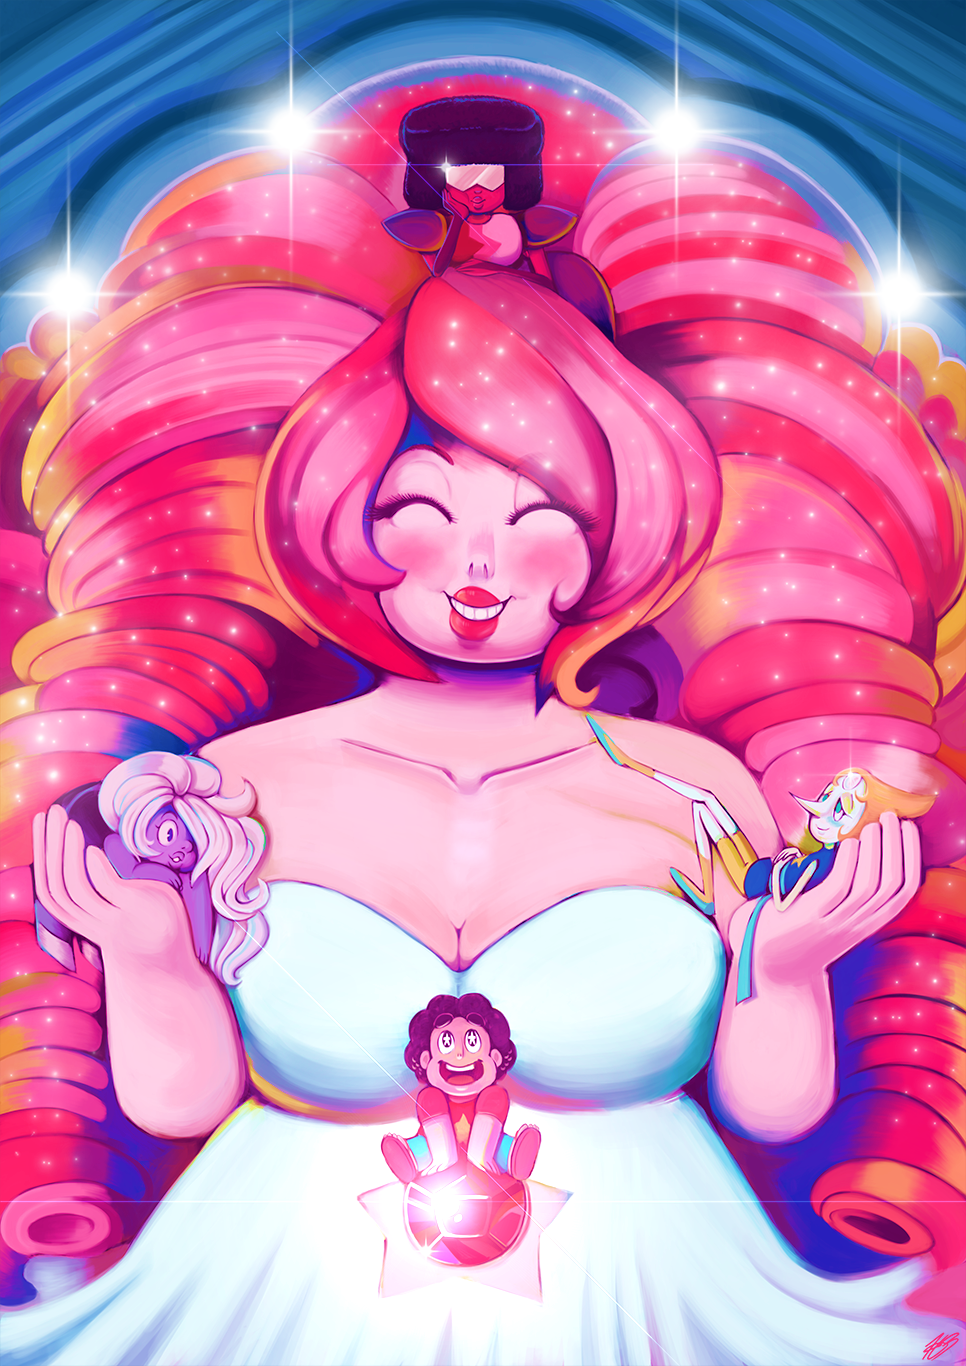 hayleymulch-art:  New Steven Universe print! Learned some new painting techniques